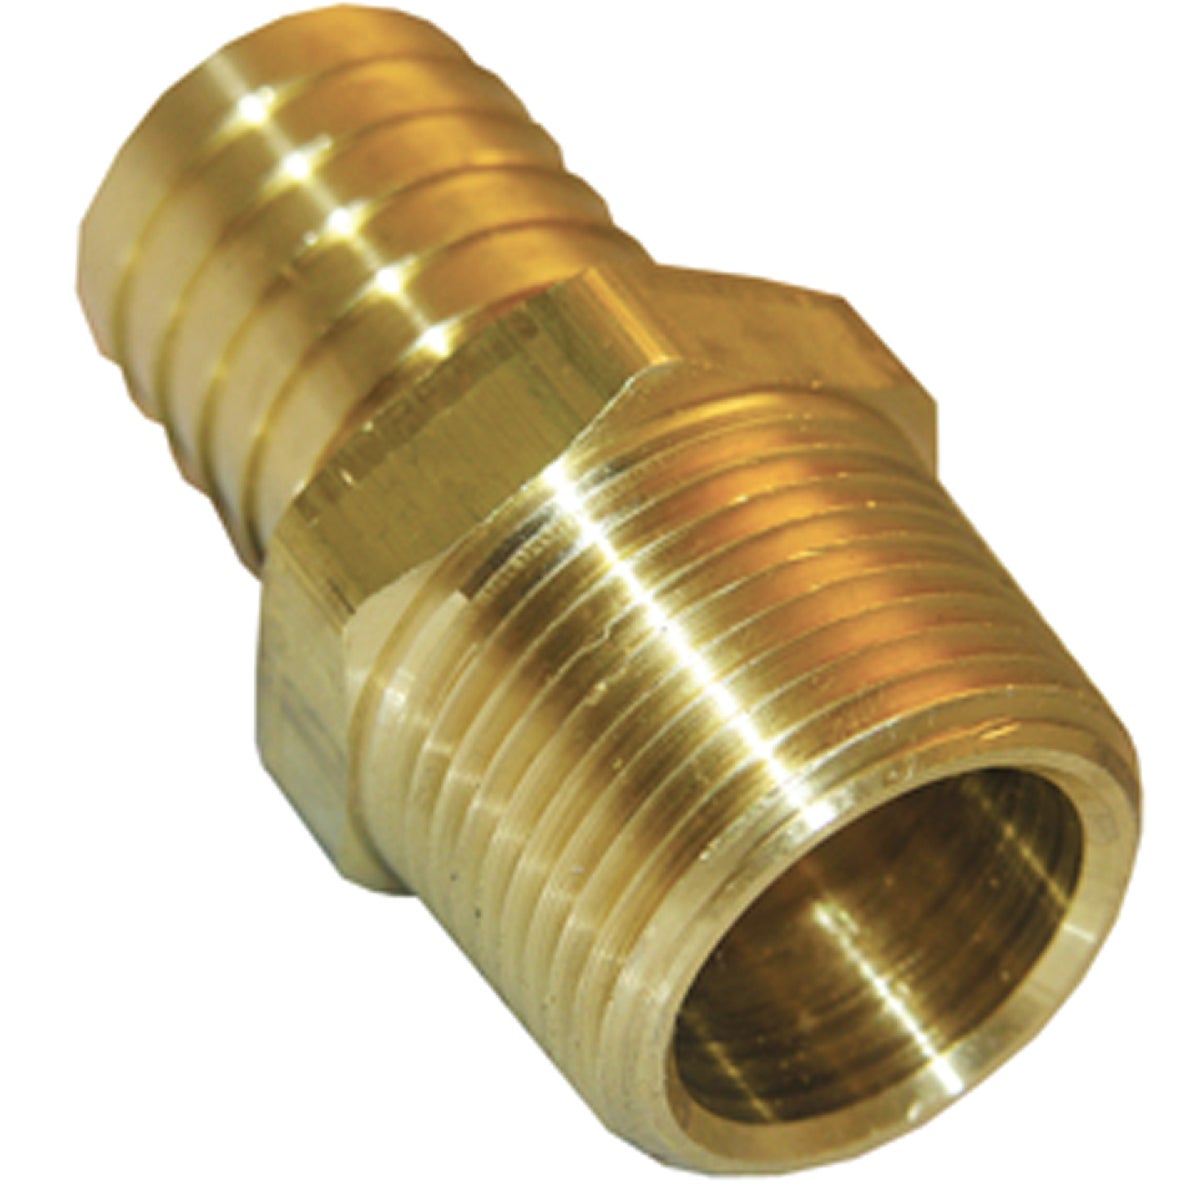 Lasco 3/4 In. MPT x 5/8 In. Brass Hose Barb Adapter